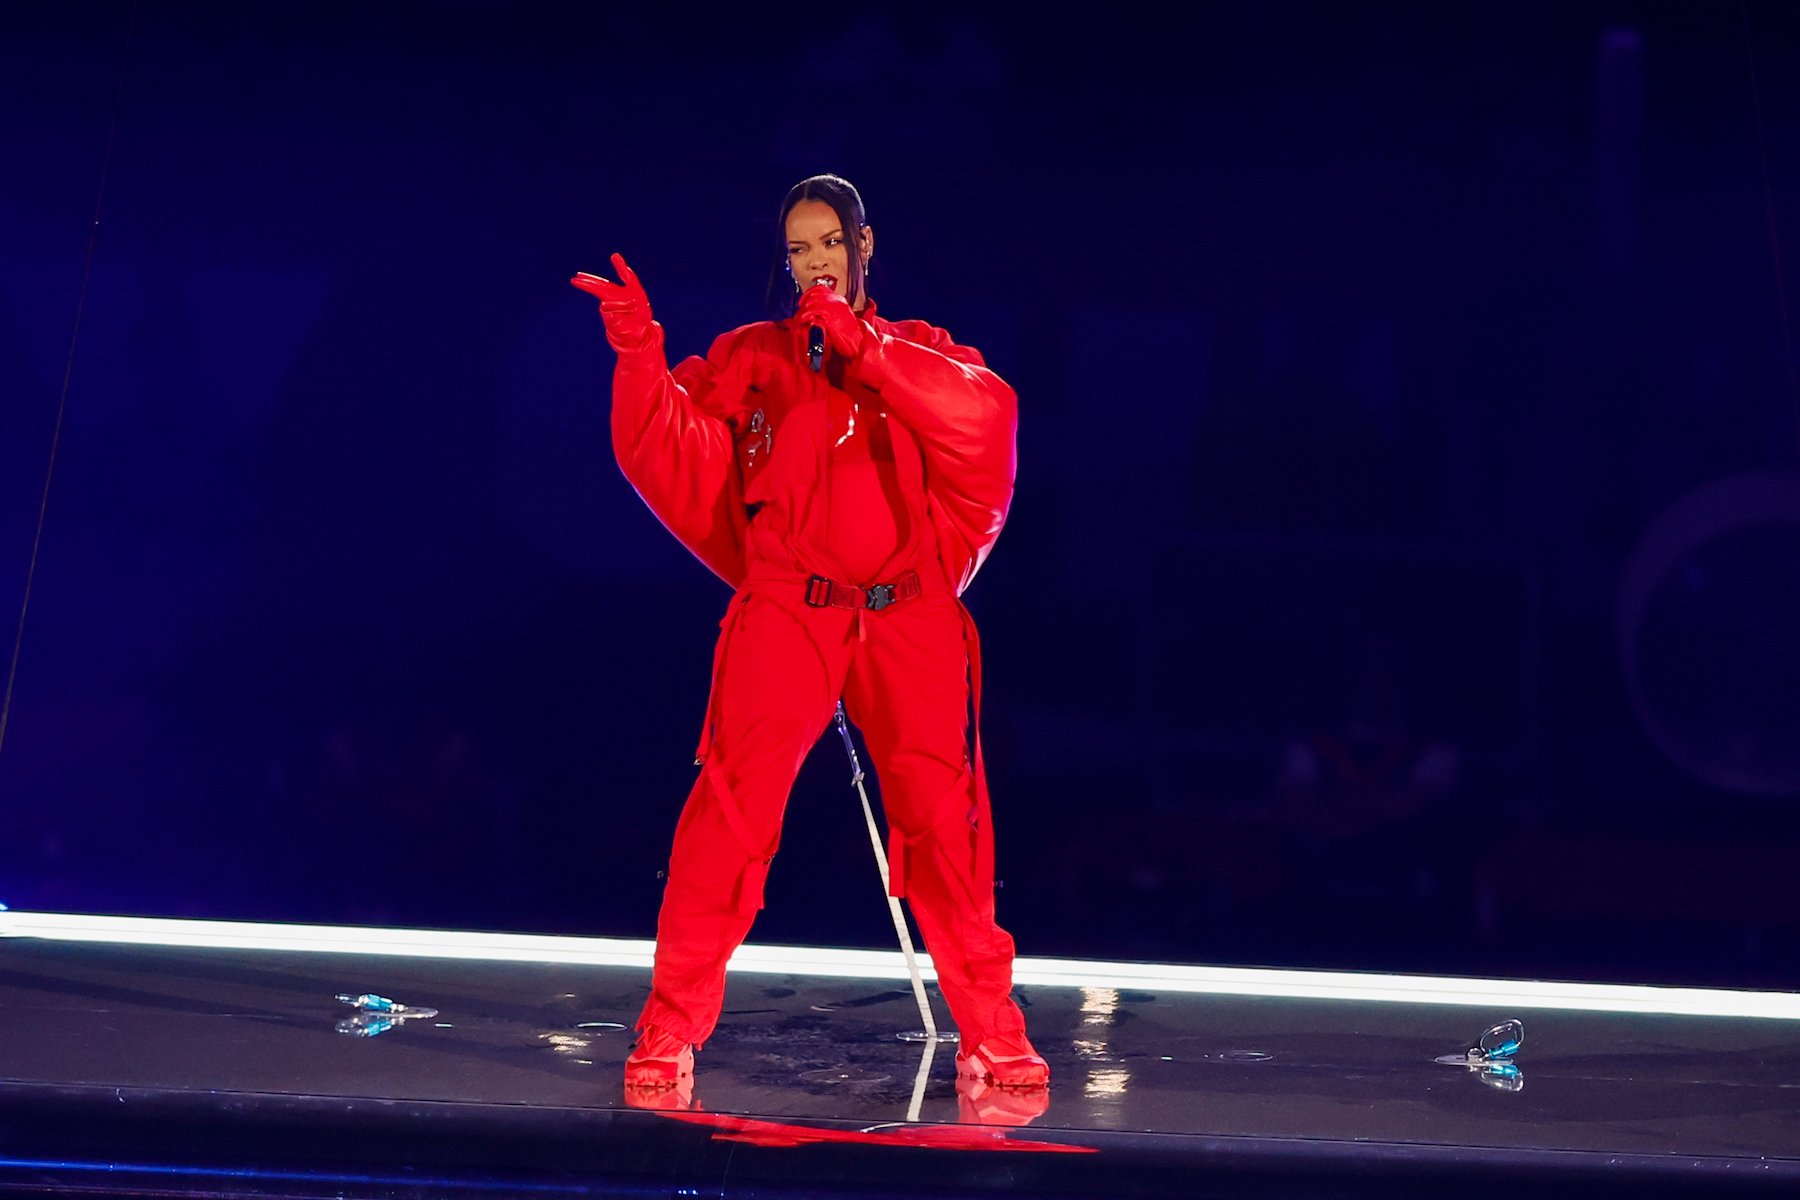 A pregnant Rihanna performs during the Super Bowl LVII halftime show